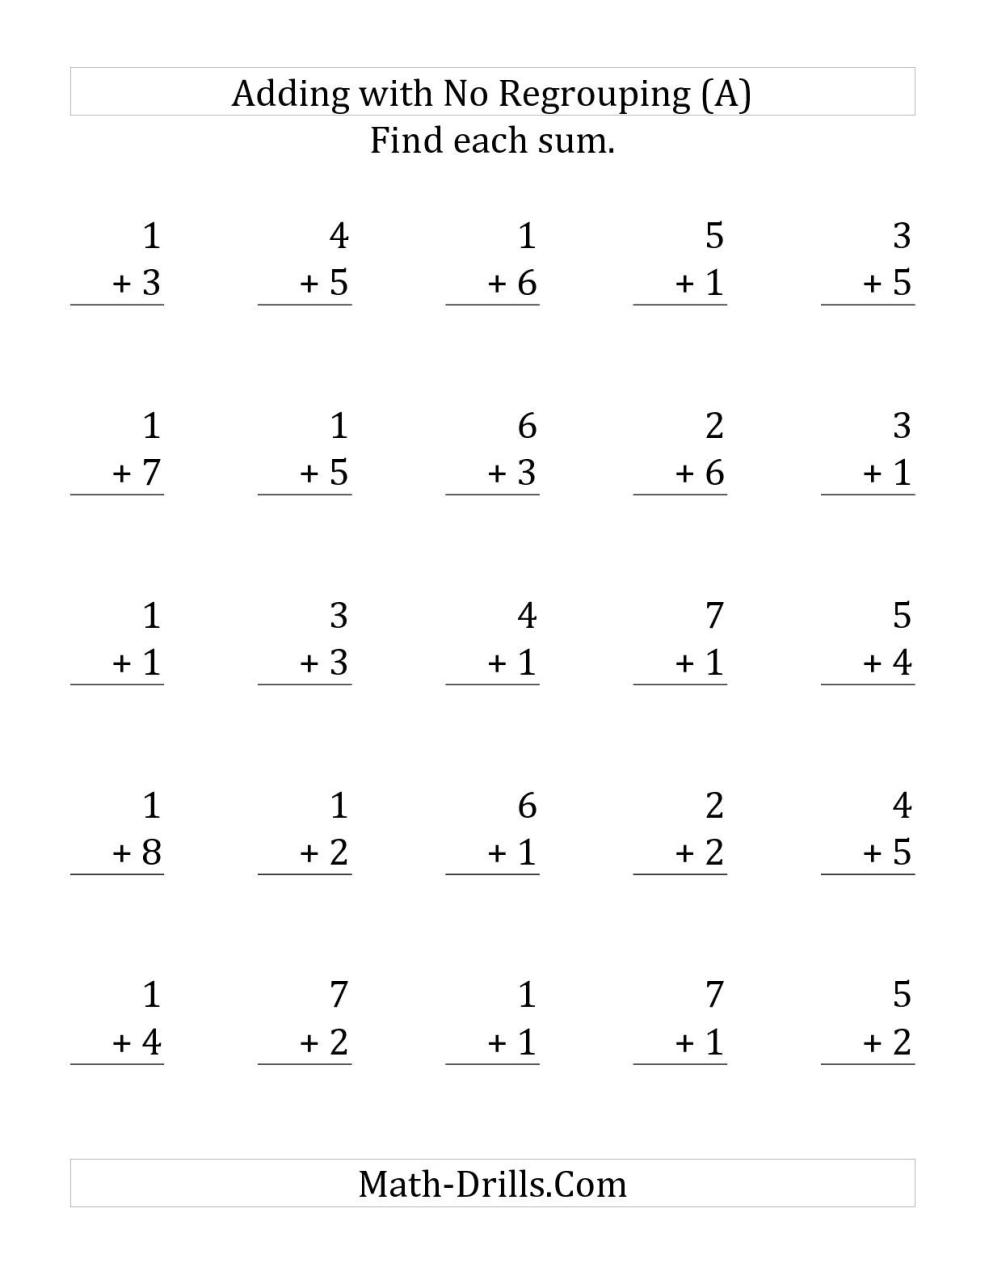 25 SingleDigit Addition Questions with No Regrouping (A) Math